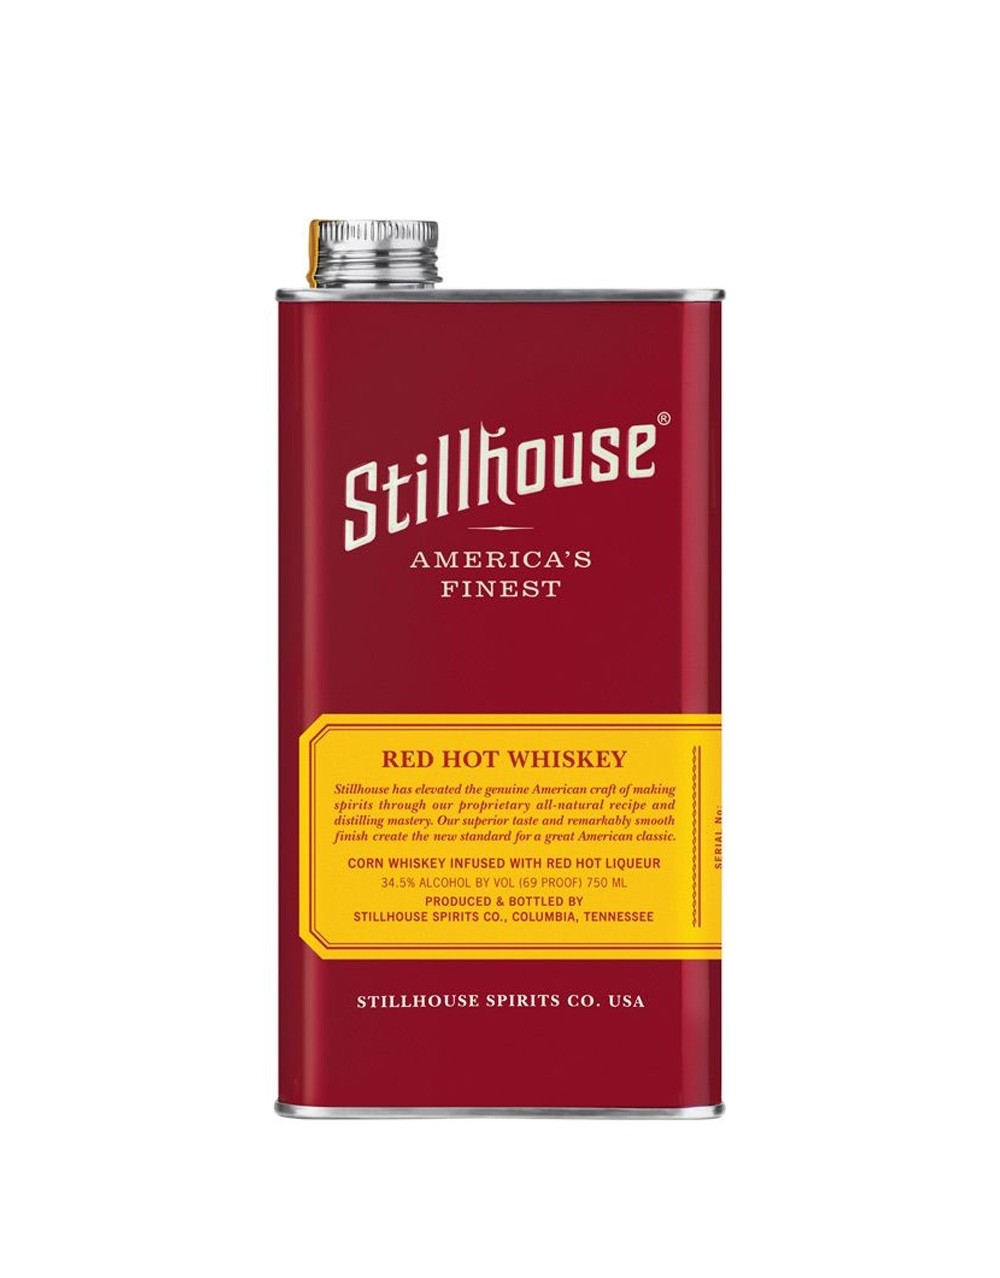 Stillhouse Red Hot Whiskey | Buy Online or Send as a Gift